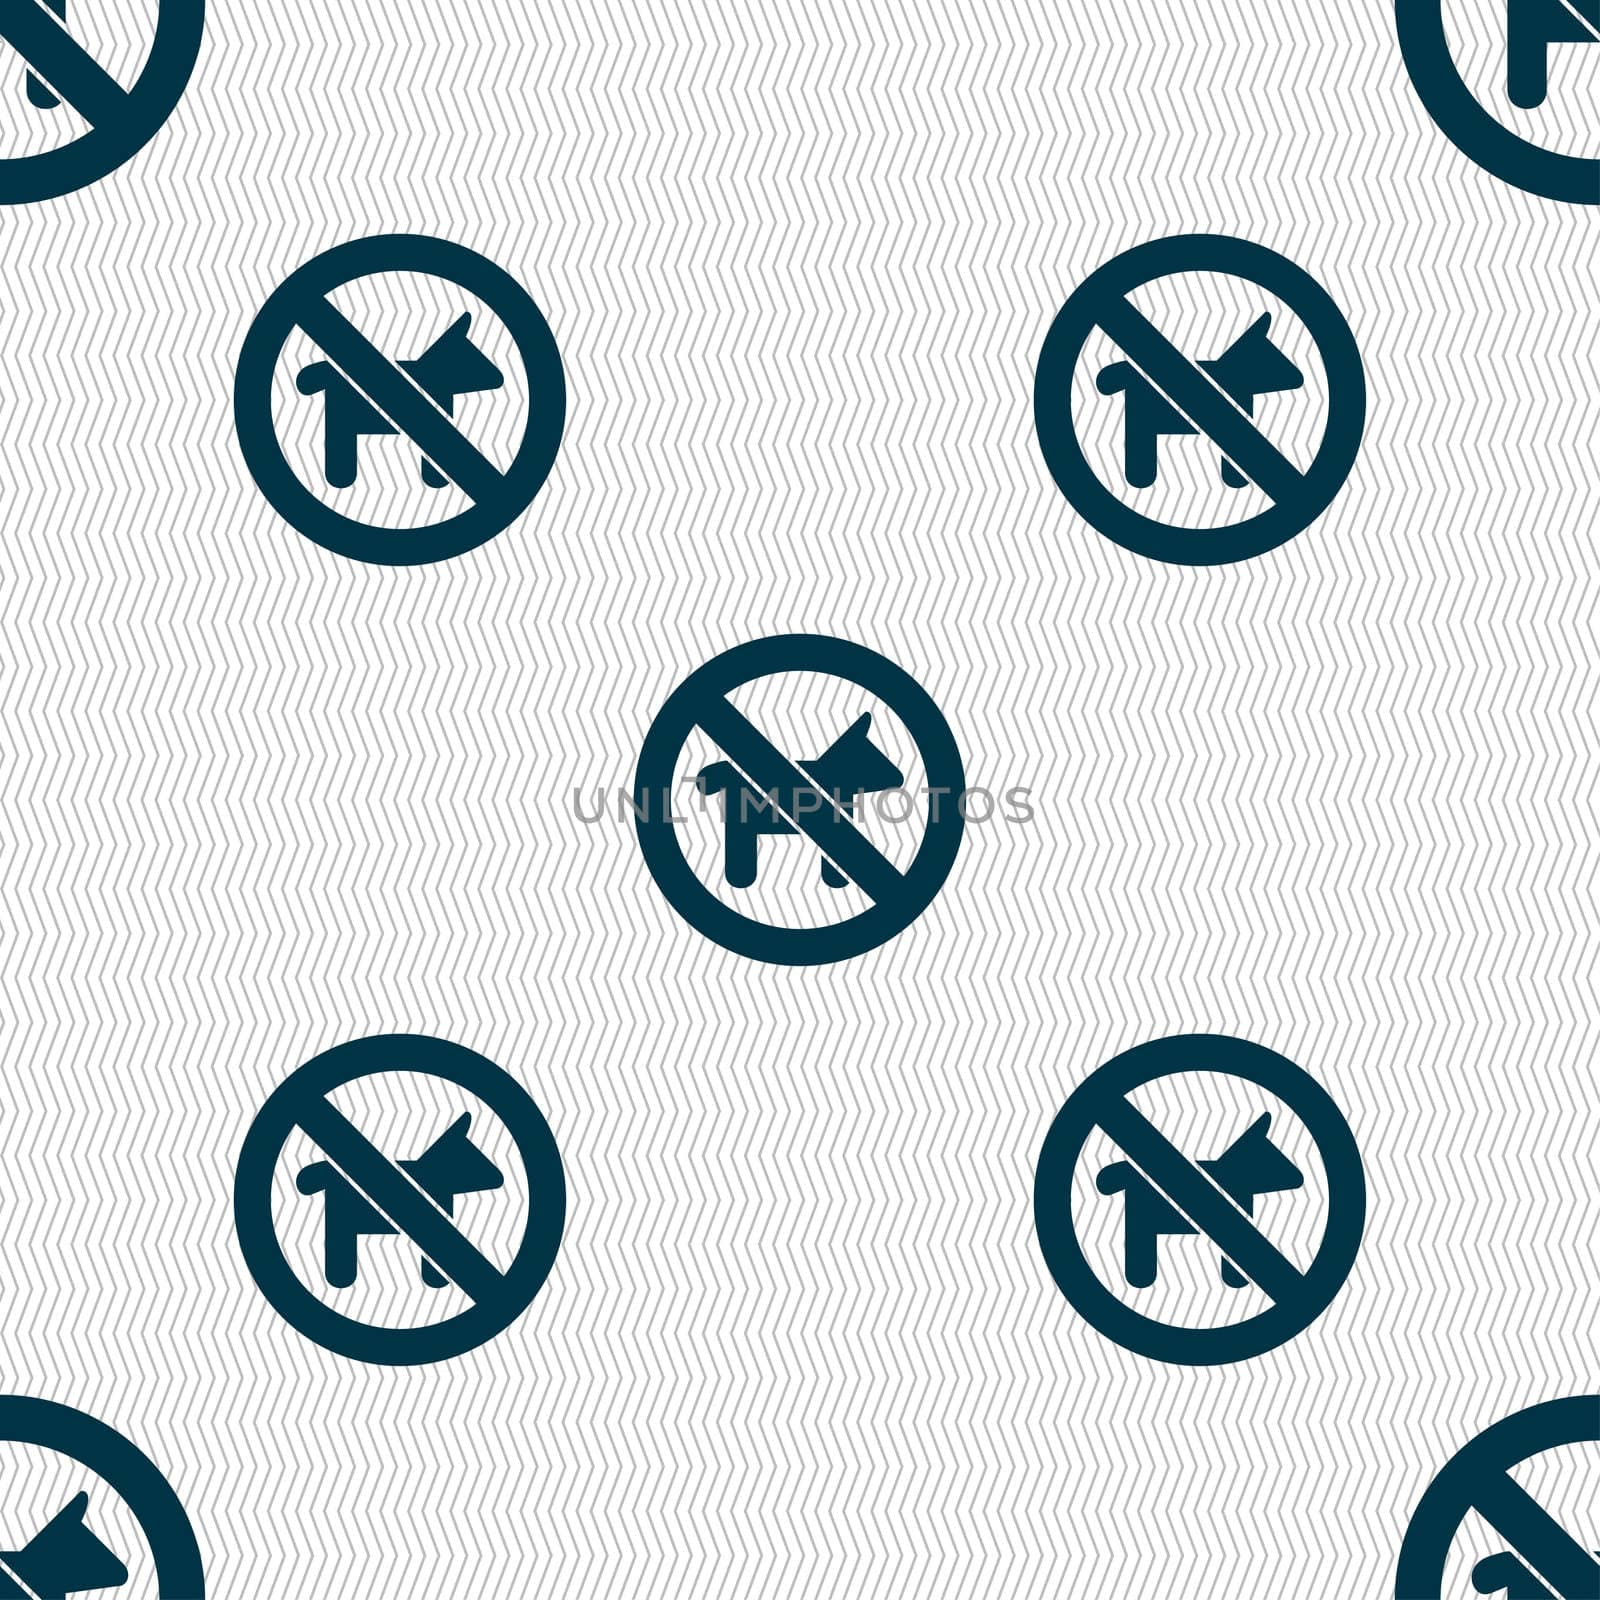 dog walking is prohibited icon sign. Seamless pattern with geometric texture. illustration